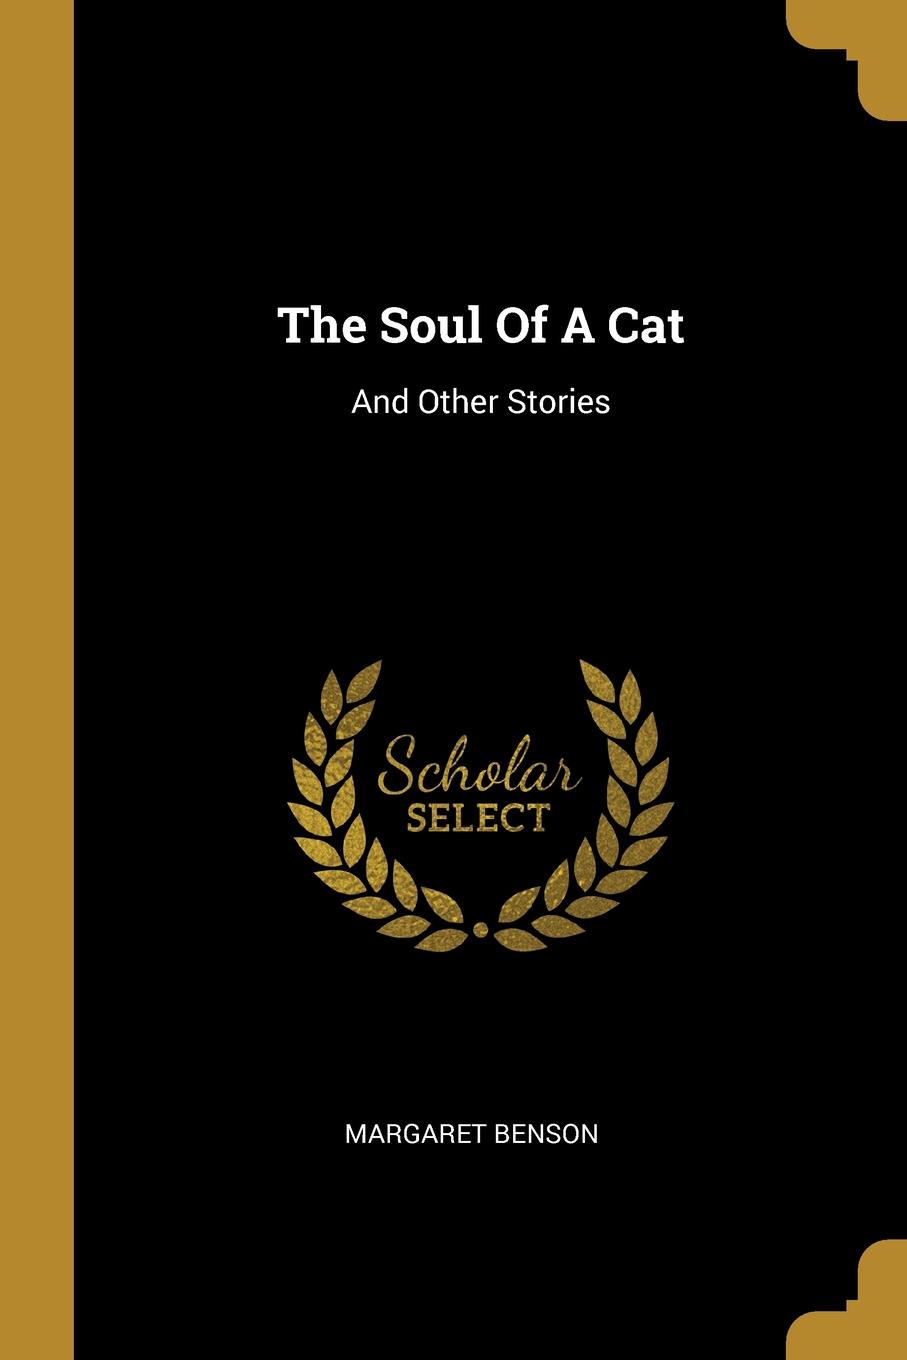 The Soul Of A Cat. And Other Stories